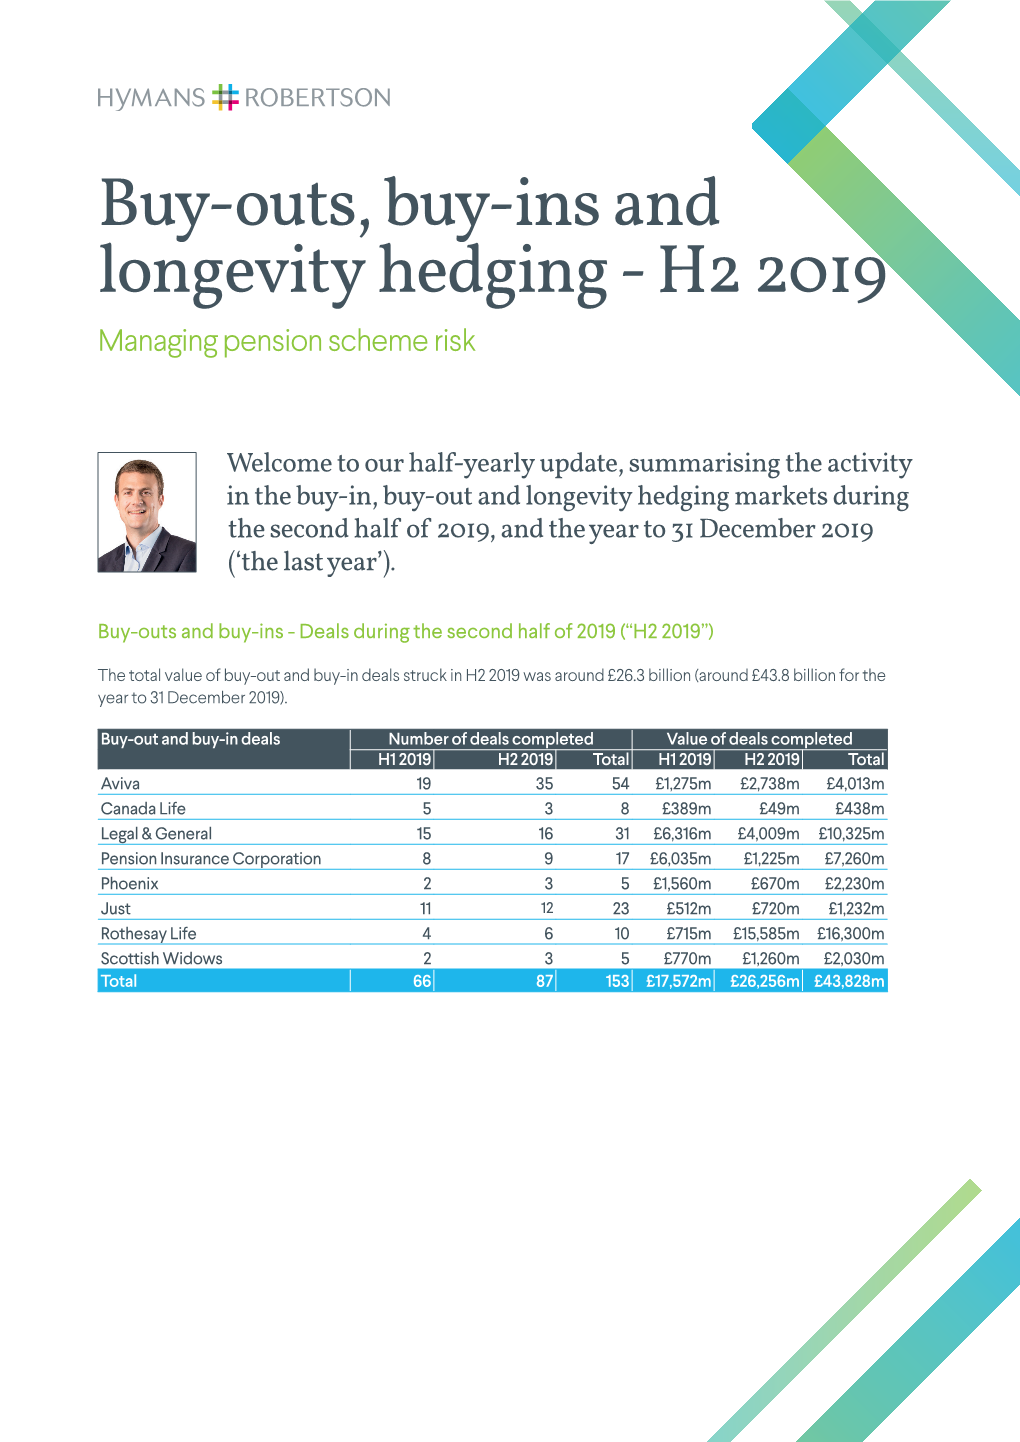 Buy-Outs, Buy-Ins and Longevity Hedging - H2 2019 Managing Pension Scheme Risk